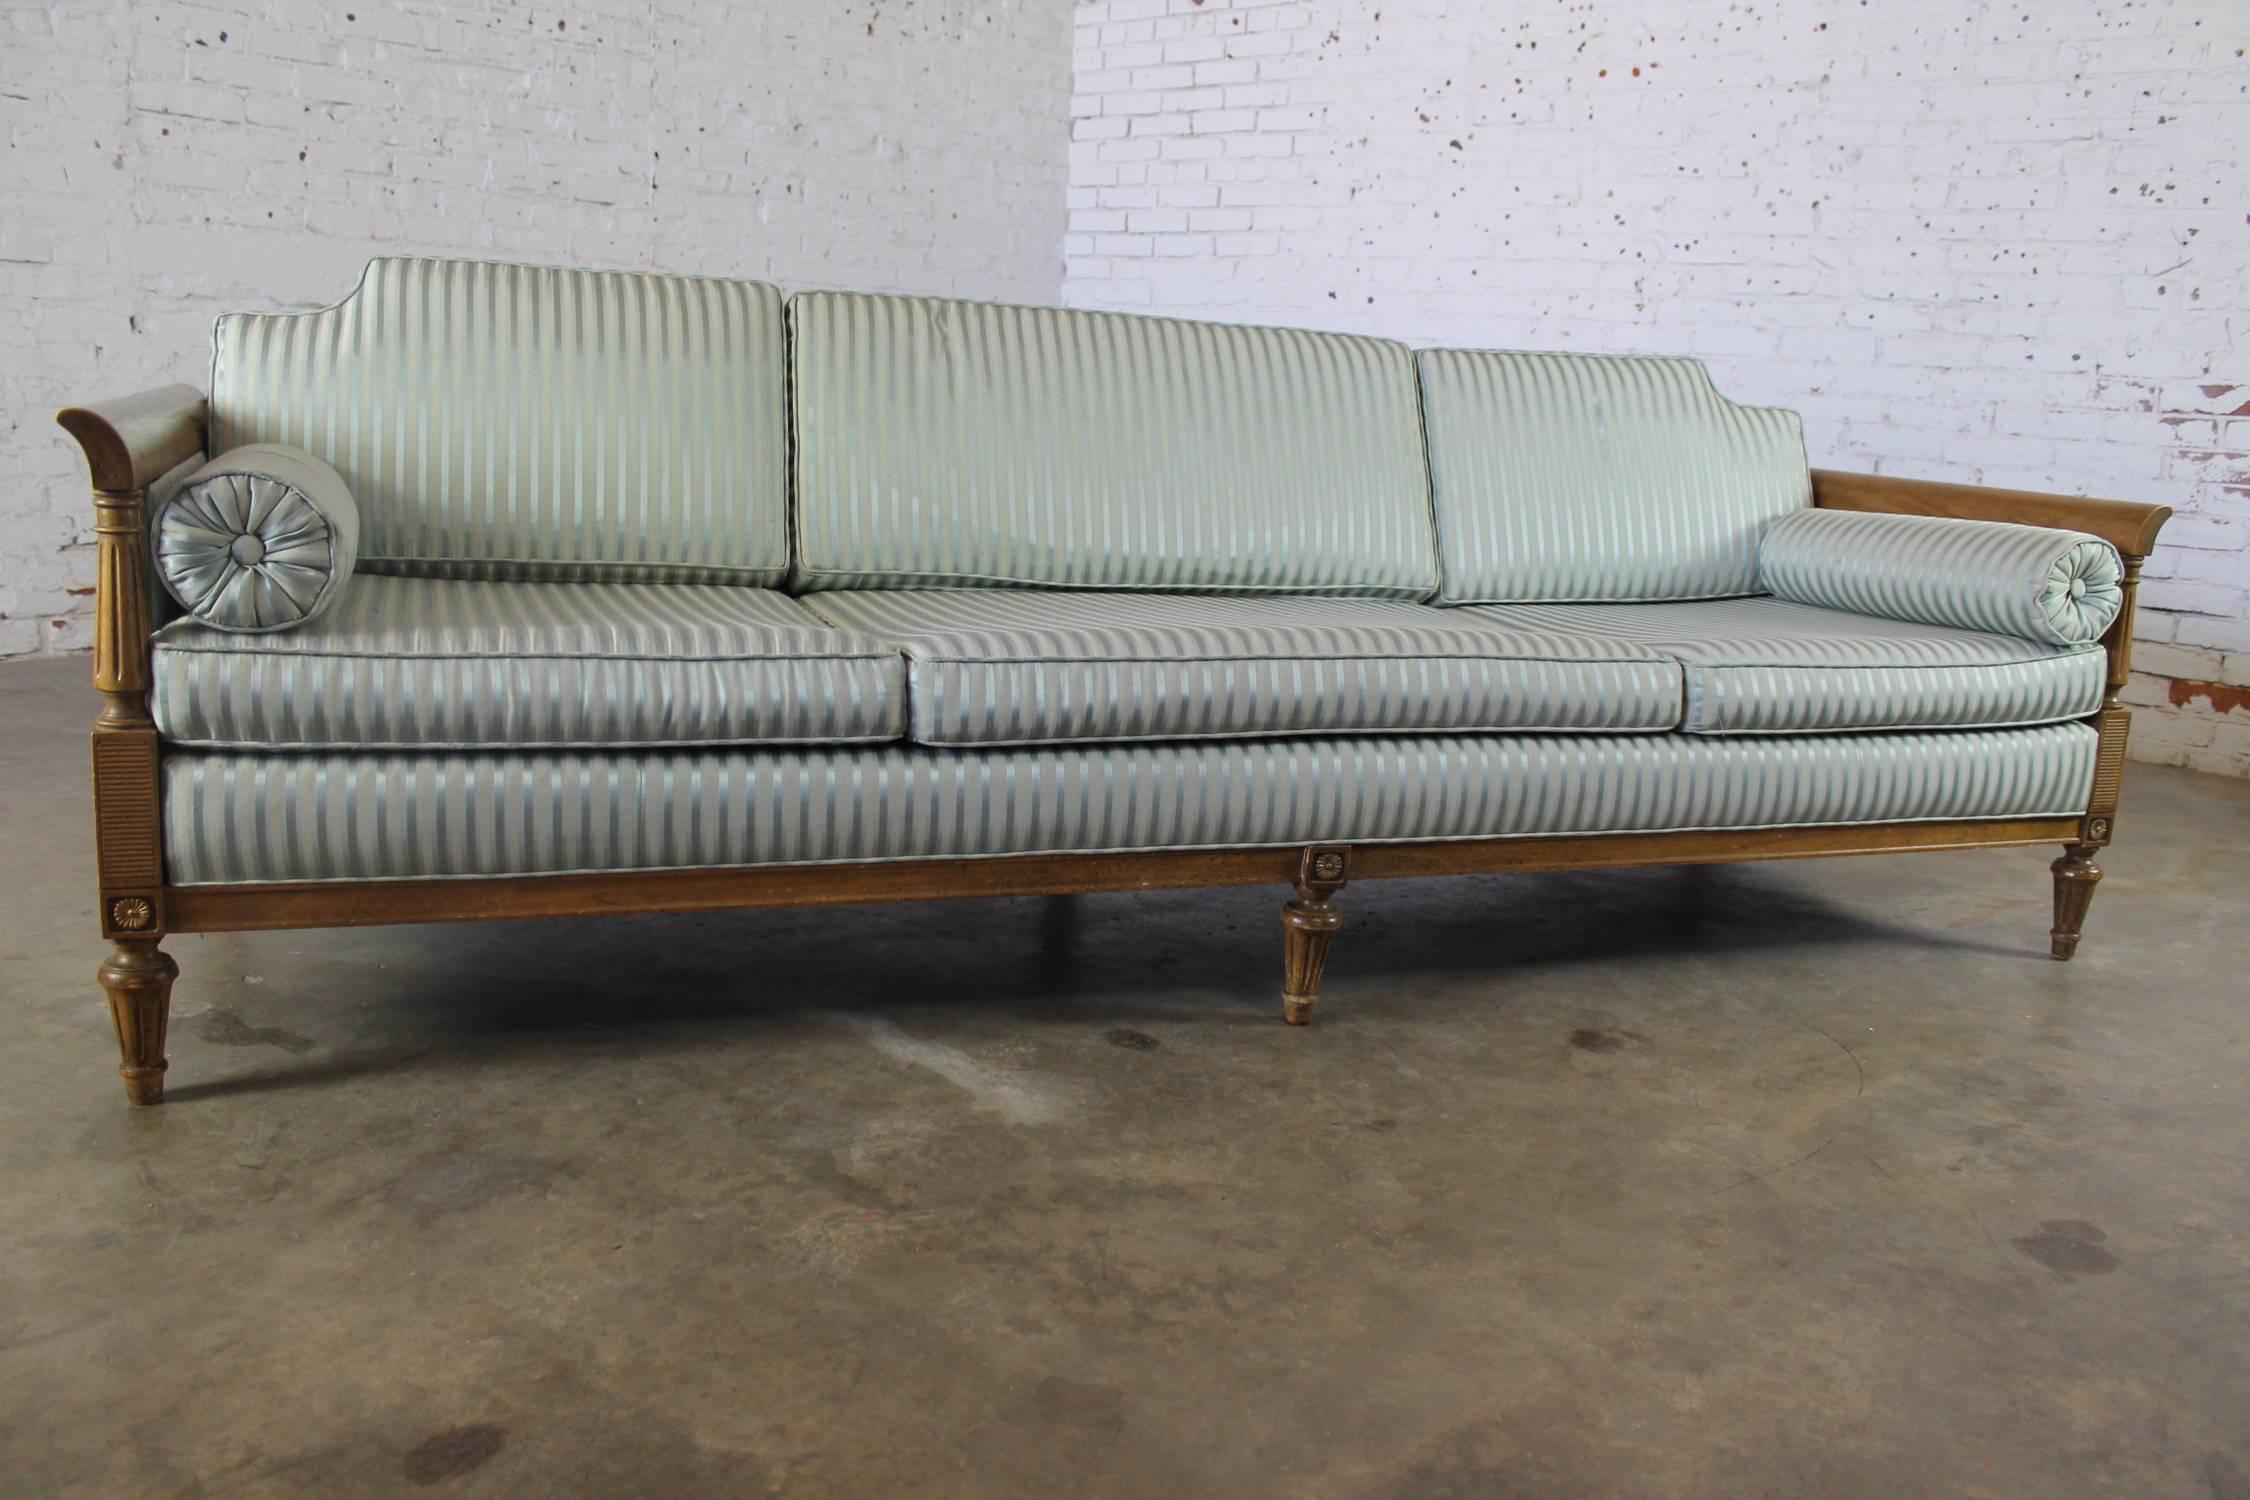 Fabulous Hollywood Regency/neoclassic sofa with caned arms and turned legs. This sofa is circa 1960 and in wonderful vintage condition.

This is an awesome vintage neoclassic Hollywood Regency sofa, circa 1960. It is stately but also rather